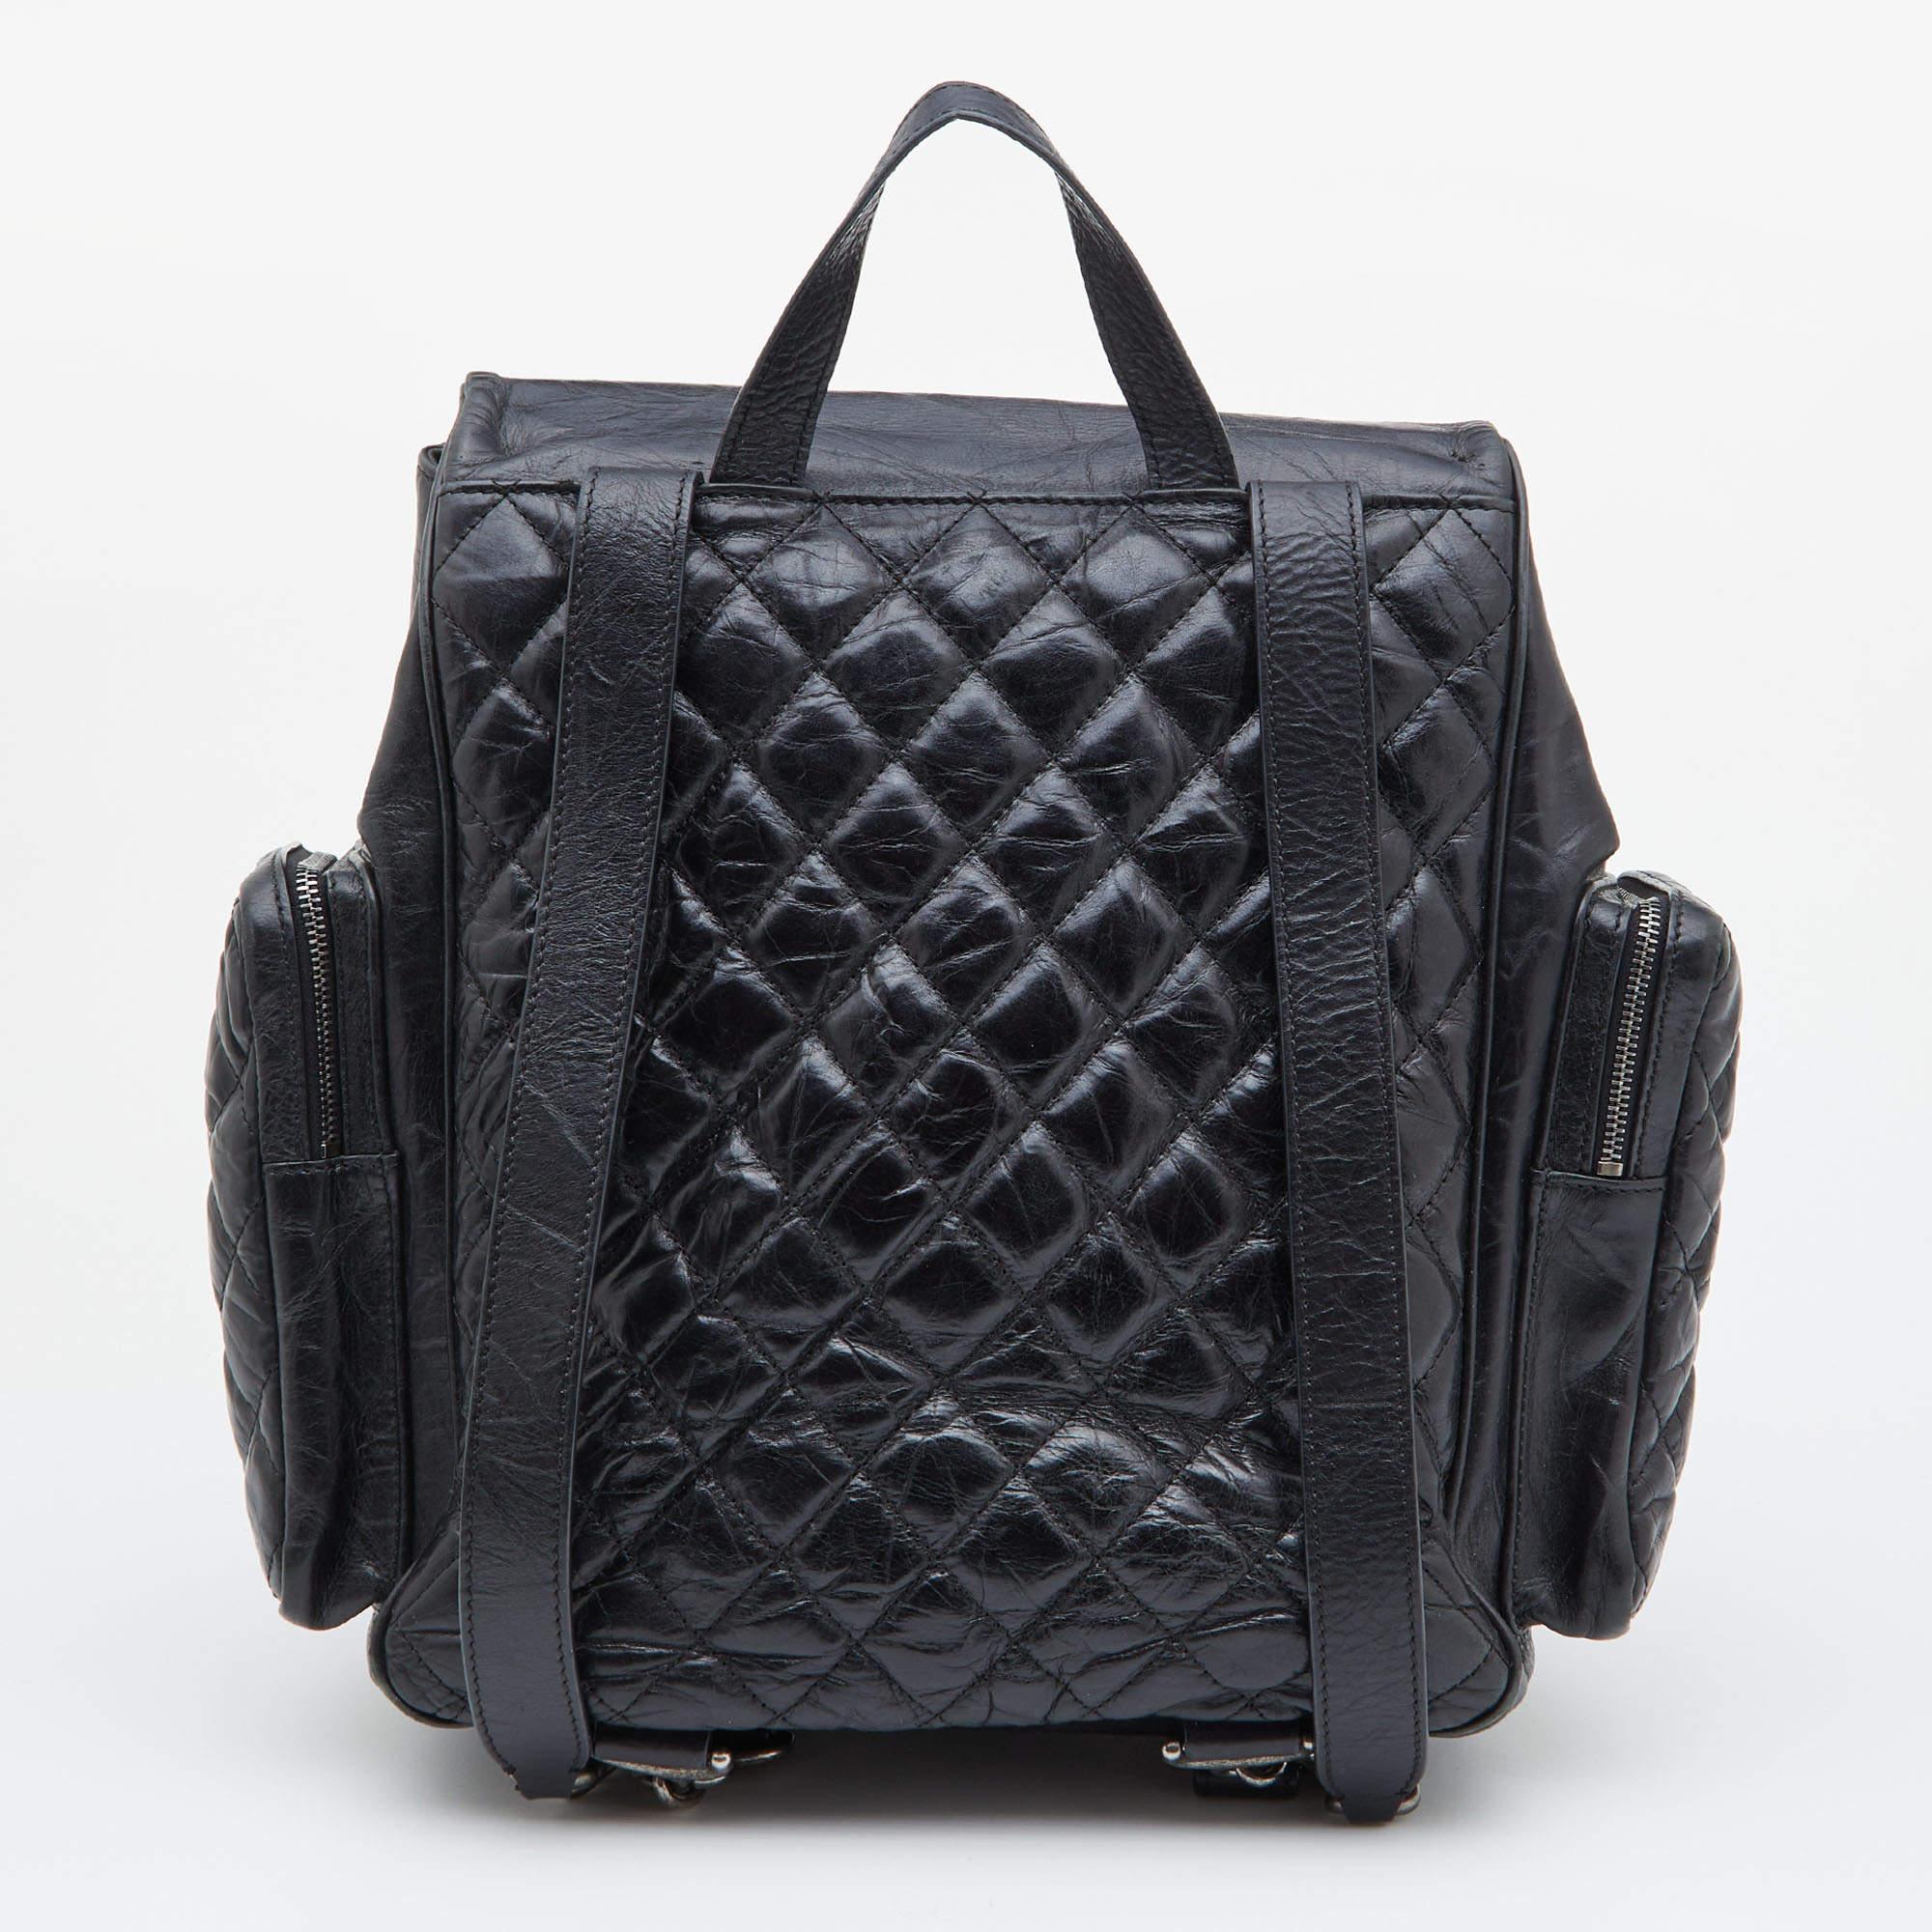 Chanel Black Quilted Leather Casual Rock Backpack 11